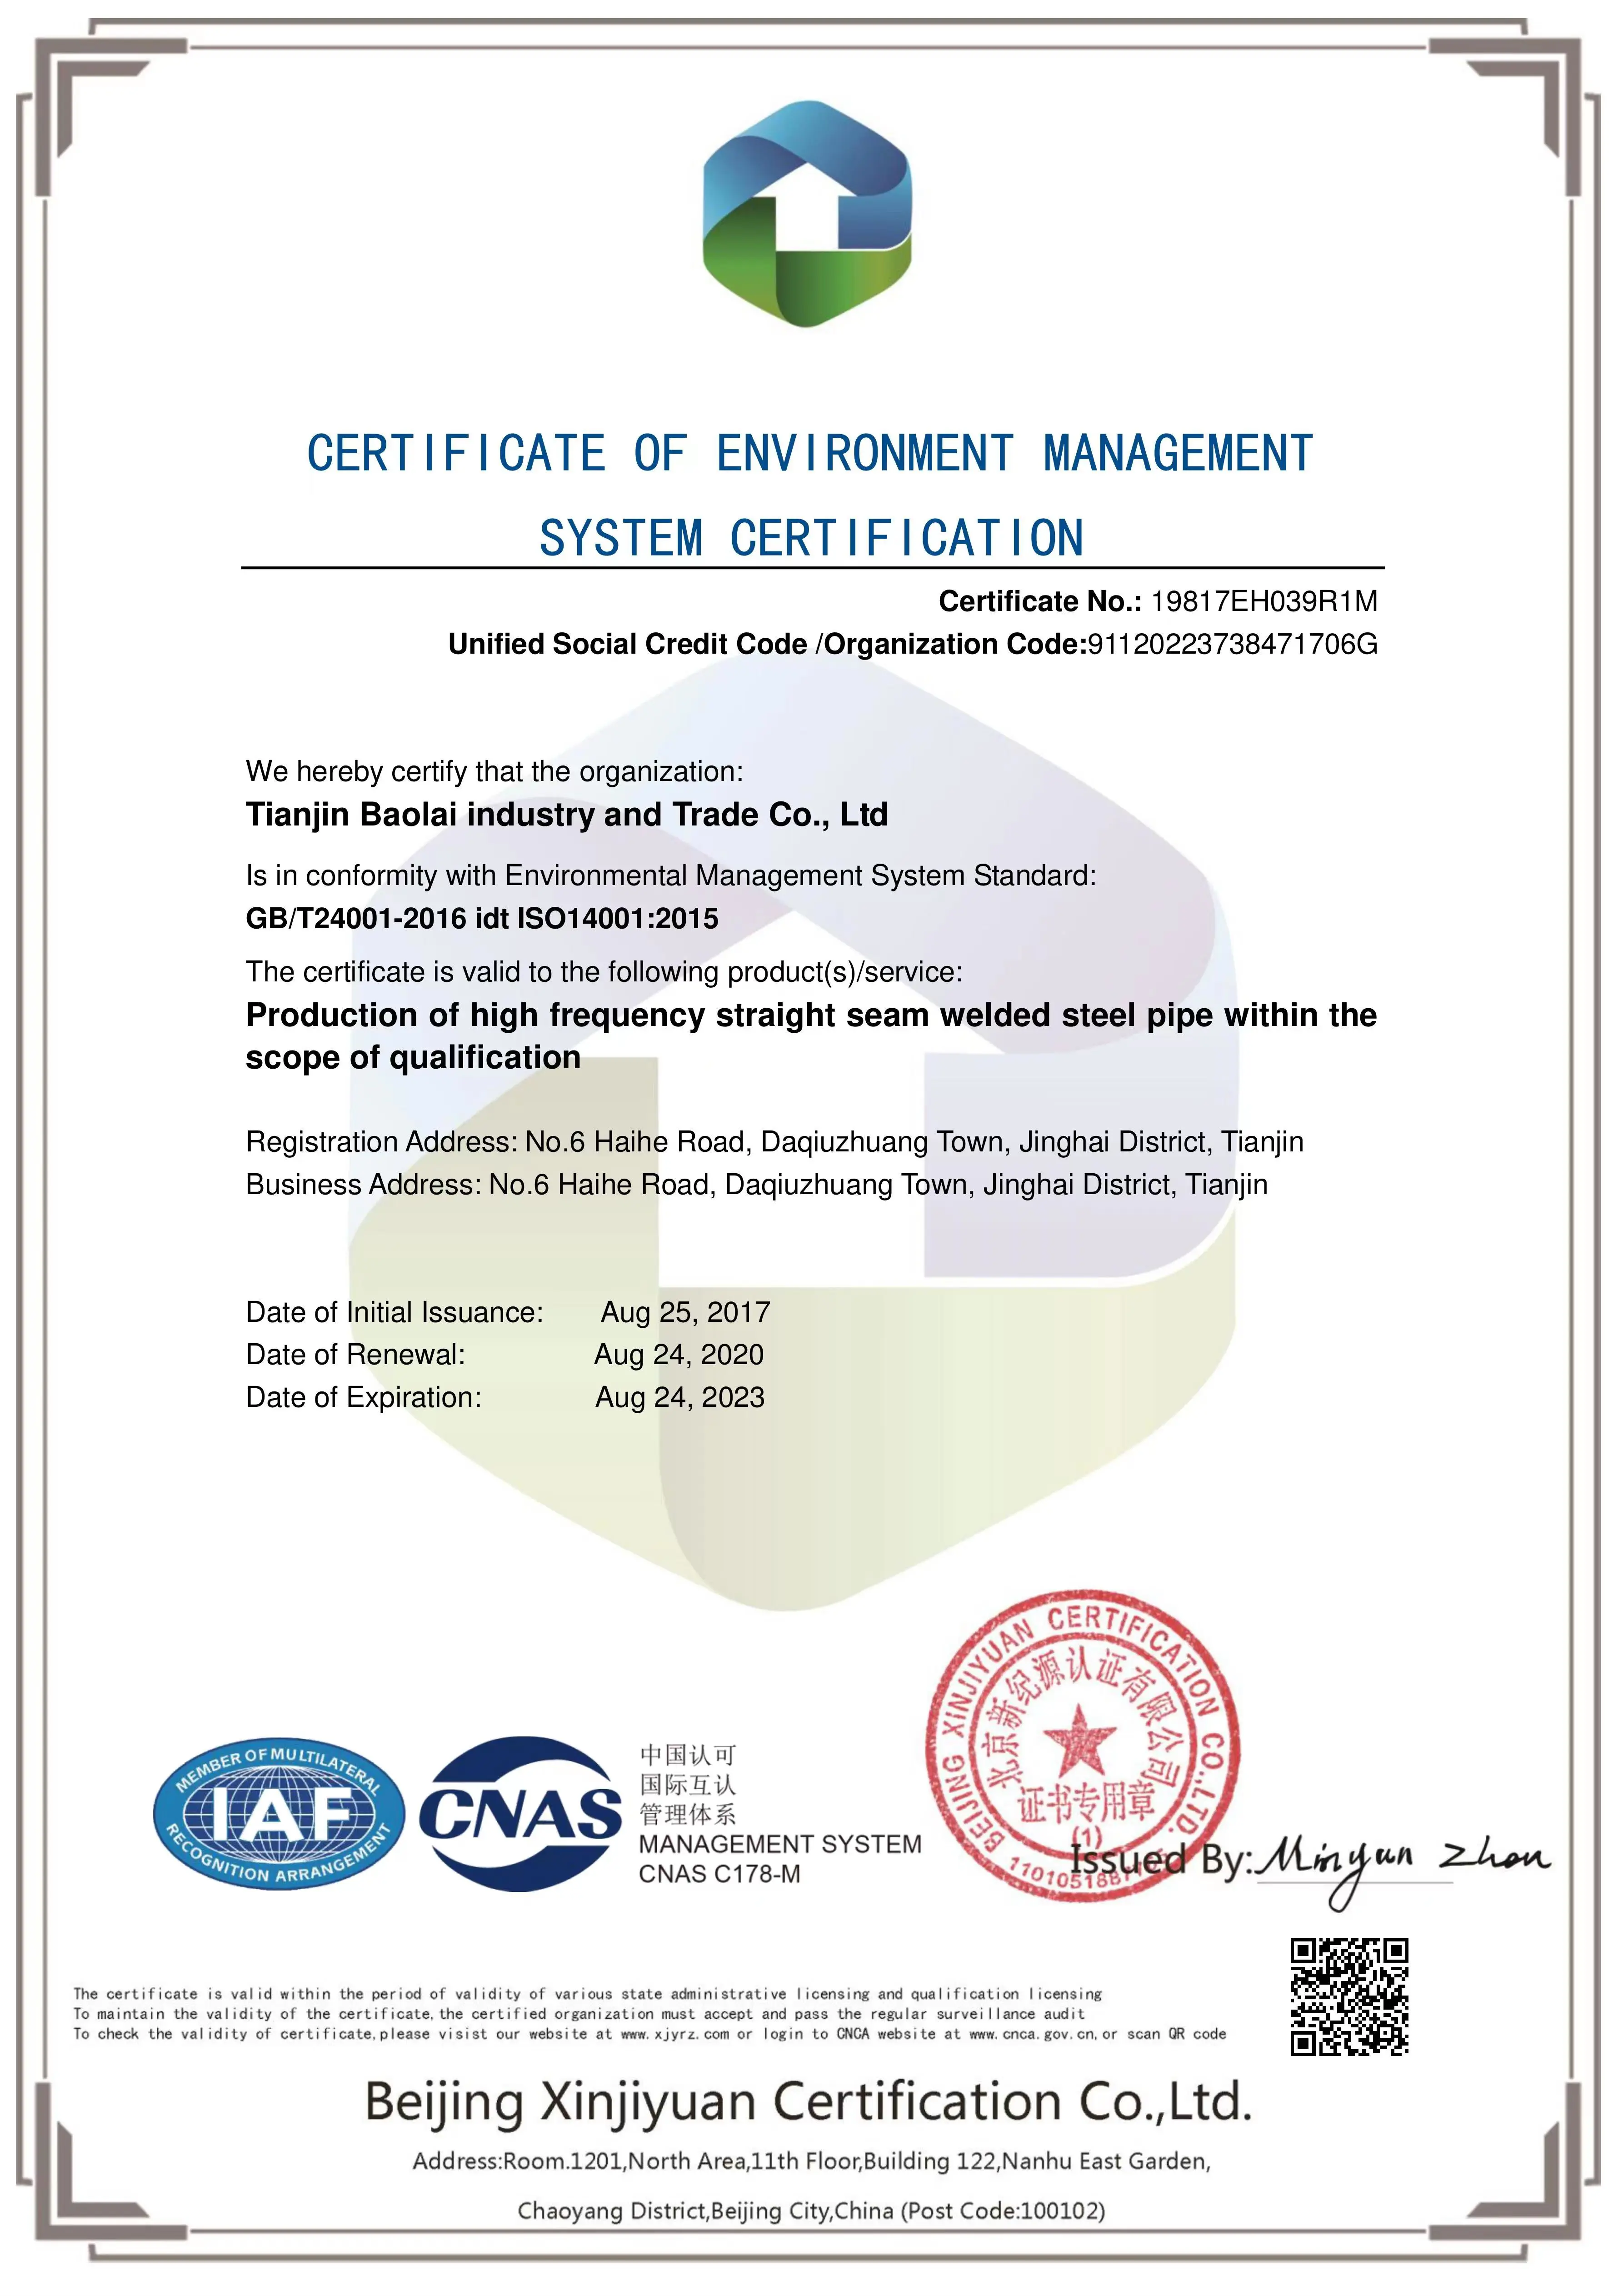 Baolai Steel Pipe business certificate -ISO 14001